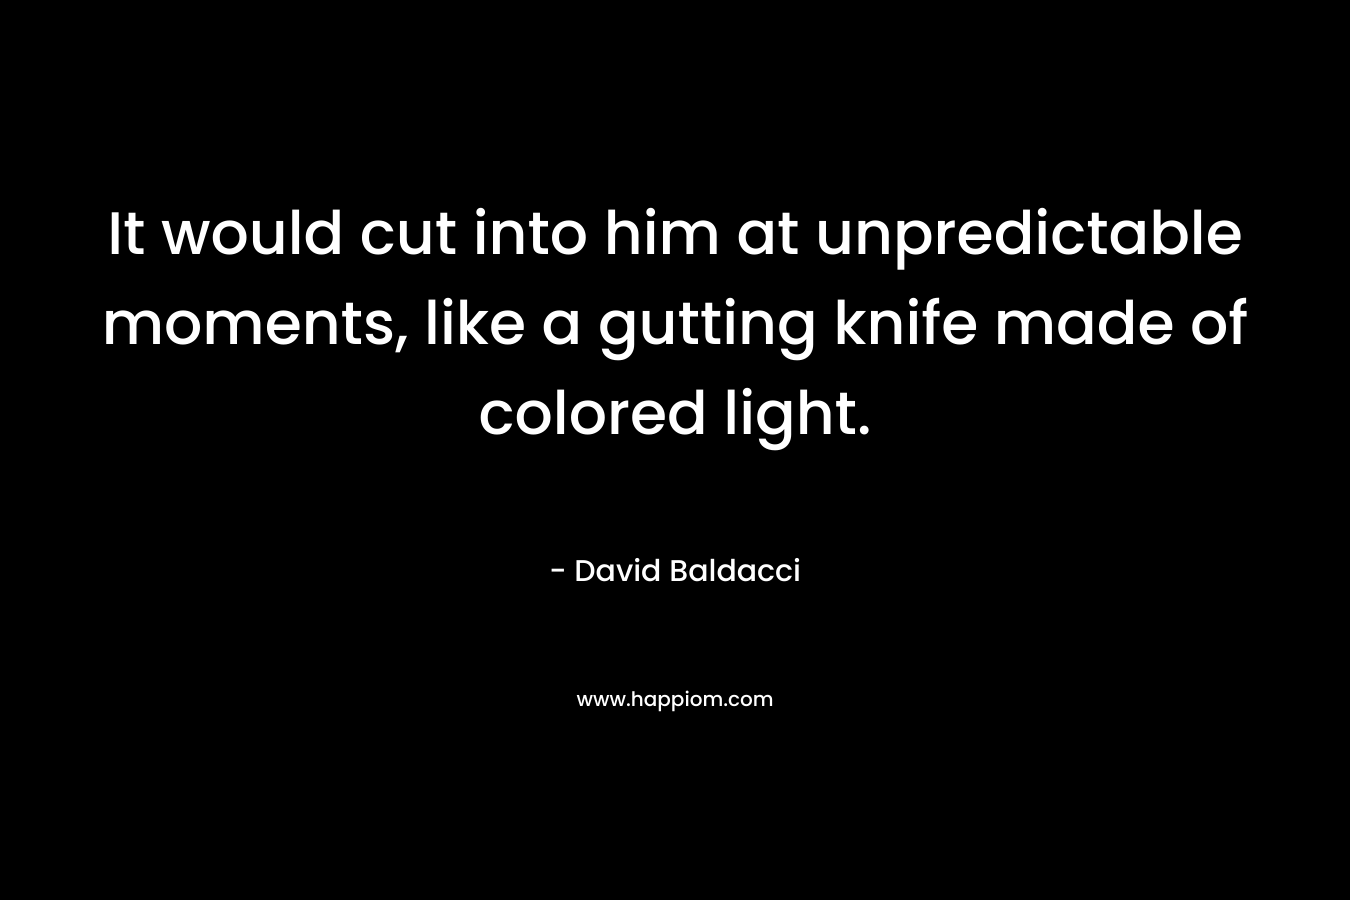 It would cut into him at unpredictable moments, like a gutting knife made of colored light. – David Baldacci